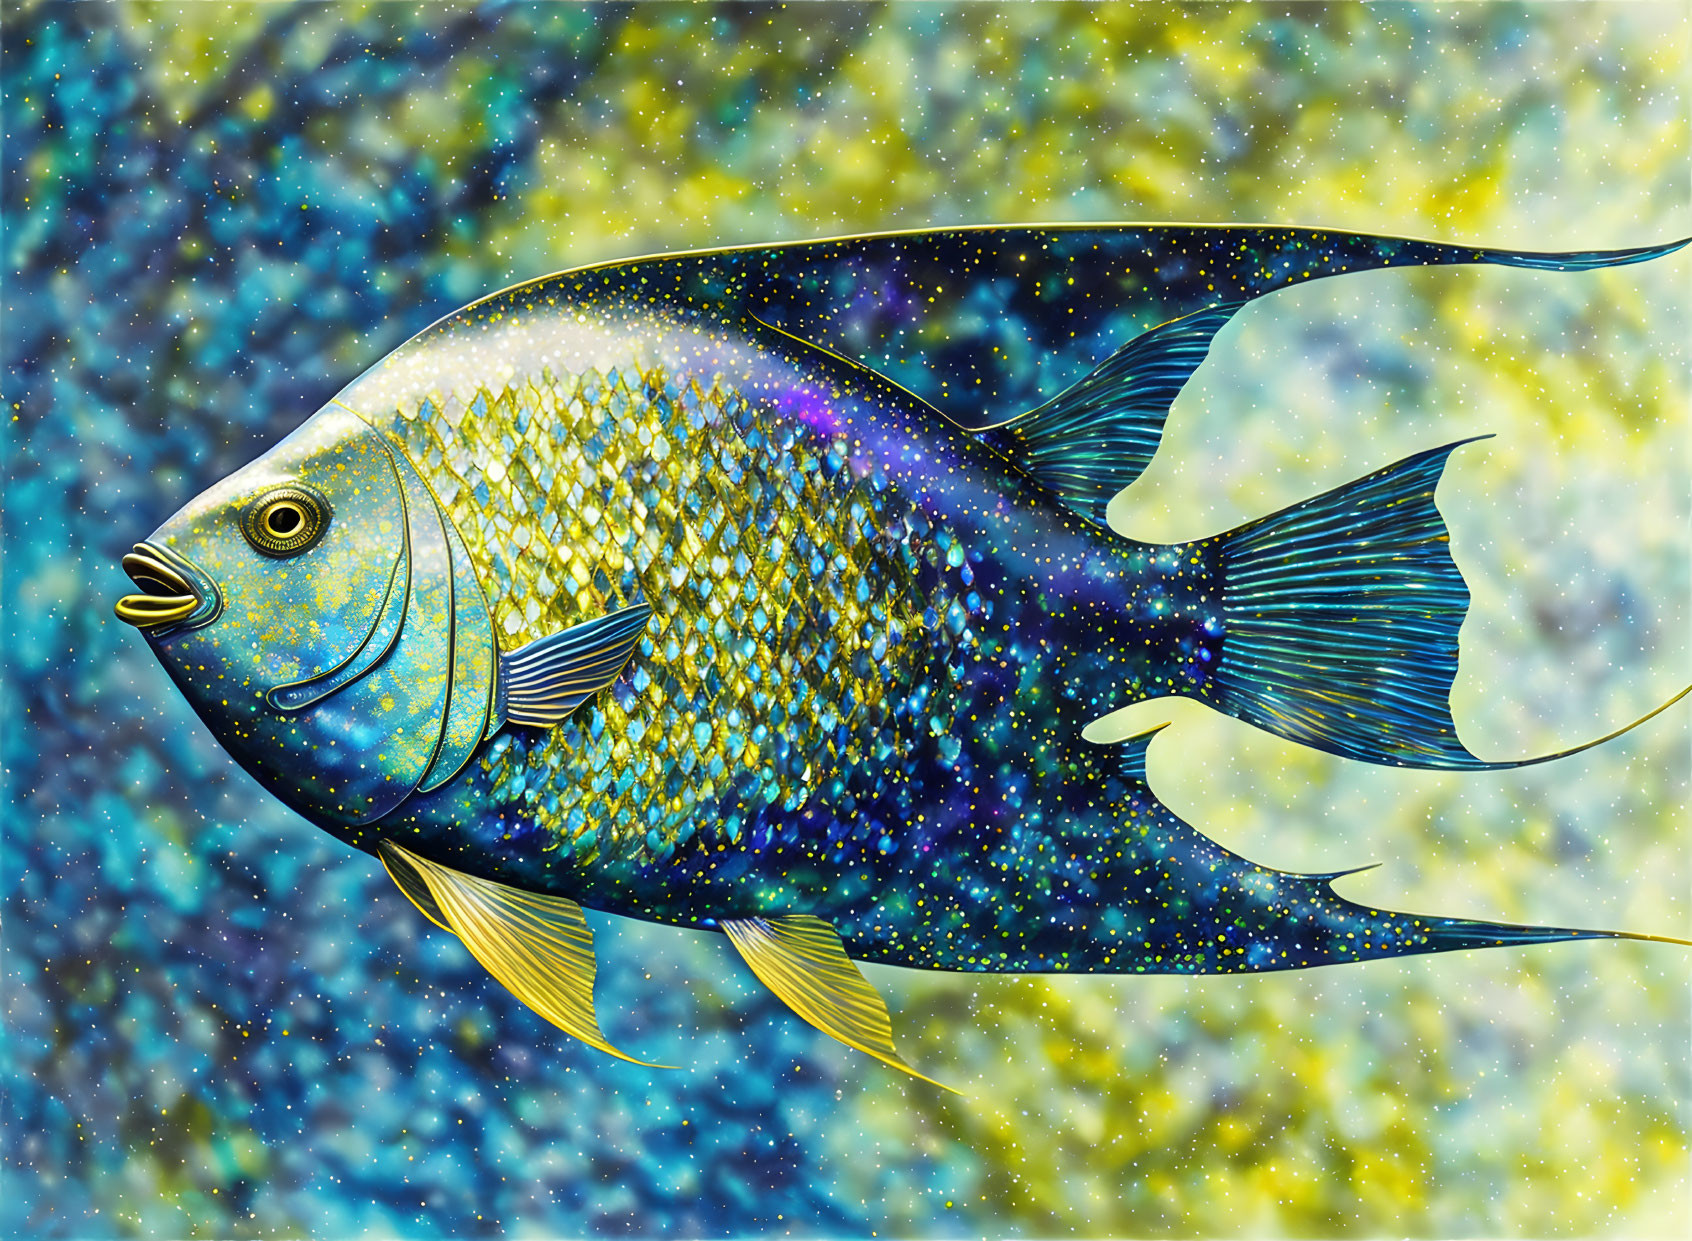 Vibrant fish illustration on blue and yellow speckled background